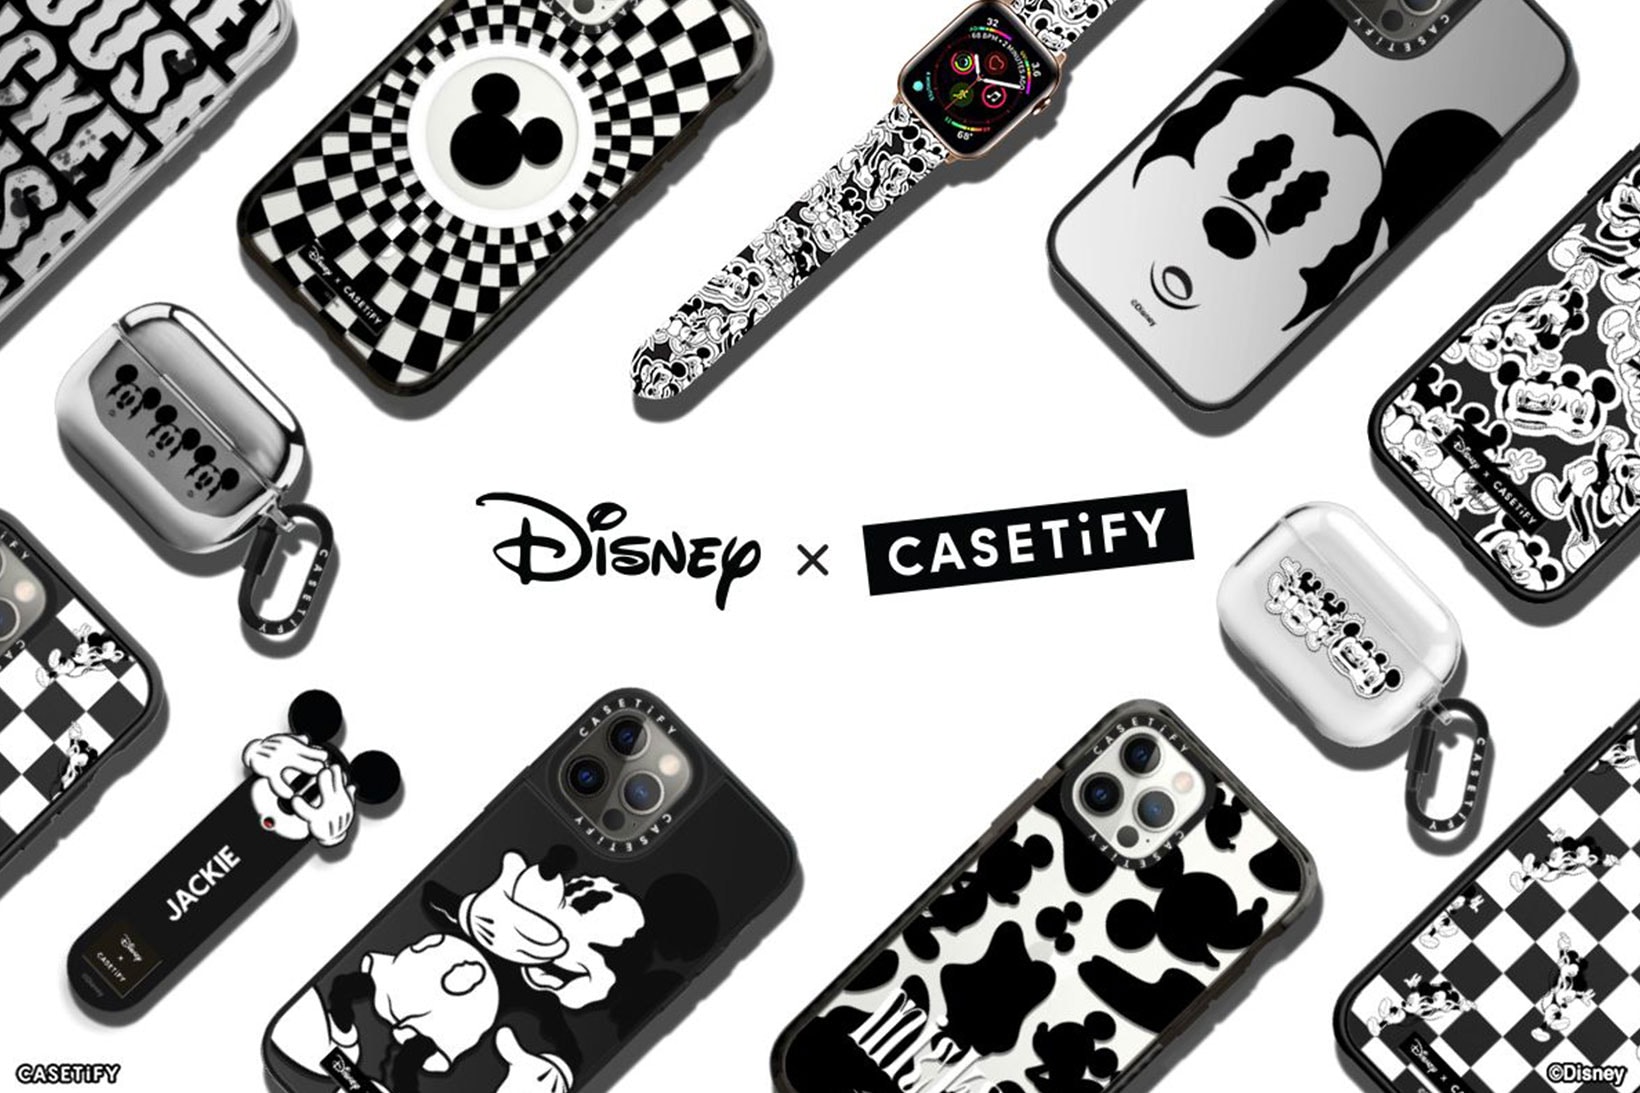 disney casetify mickey mouse collaboration iphone cases apple wach straps bands airpods